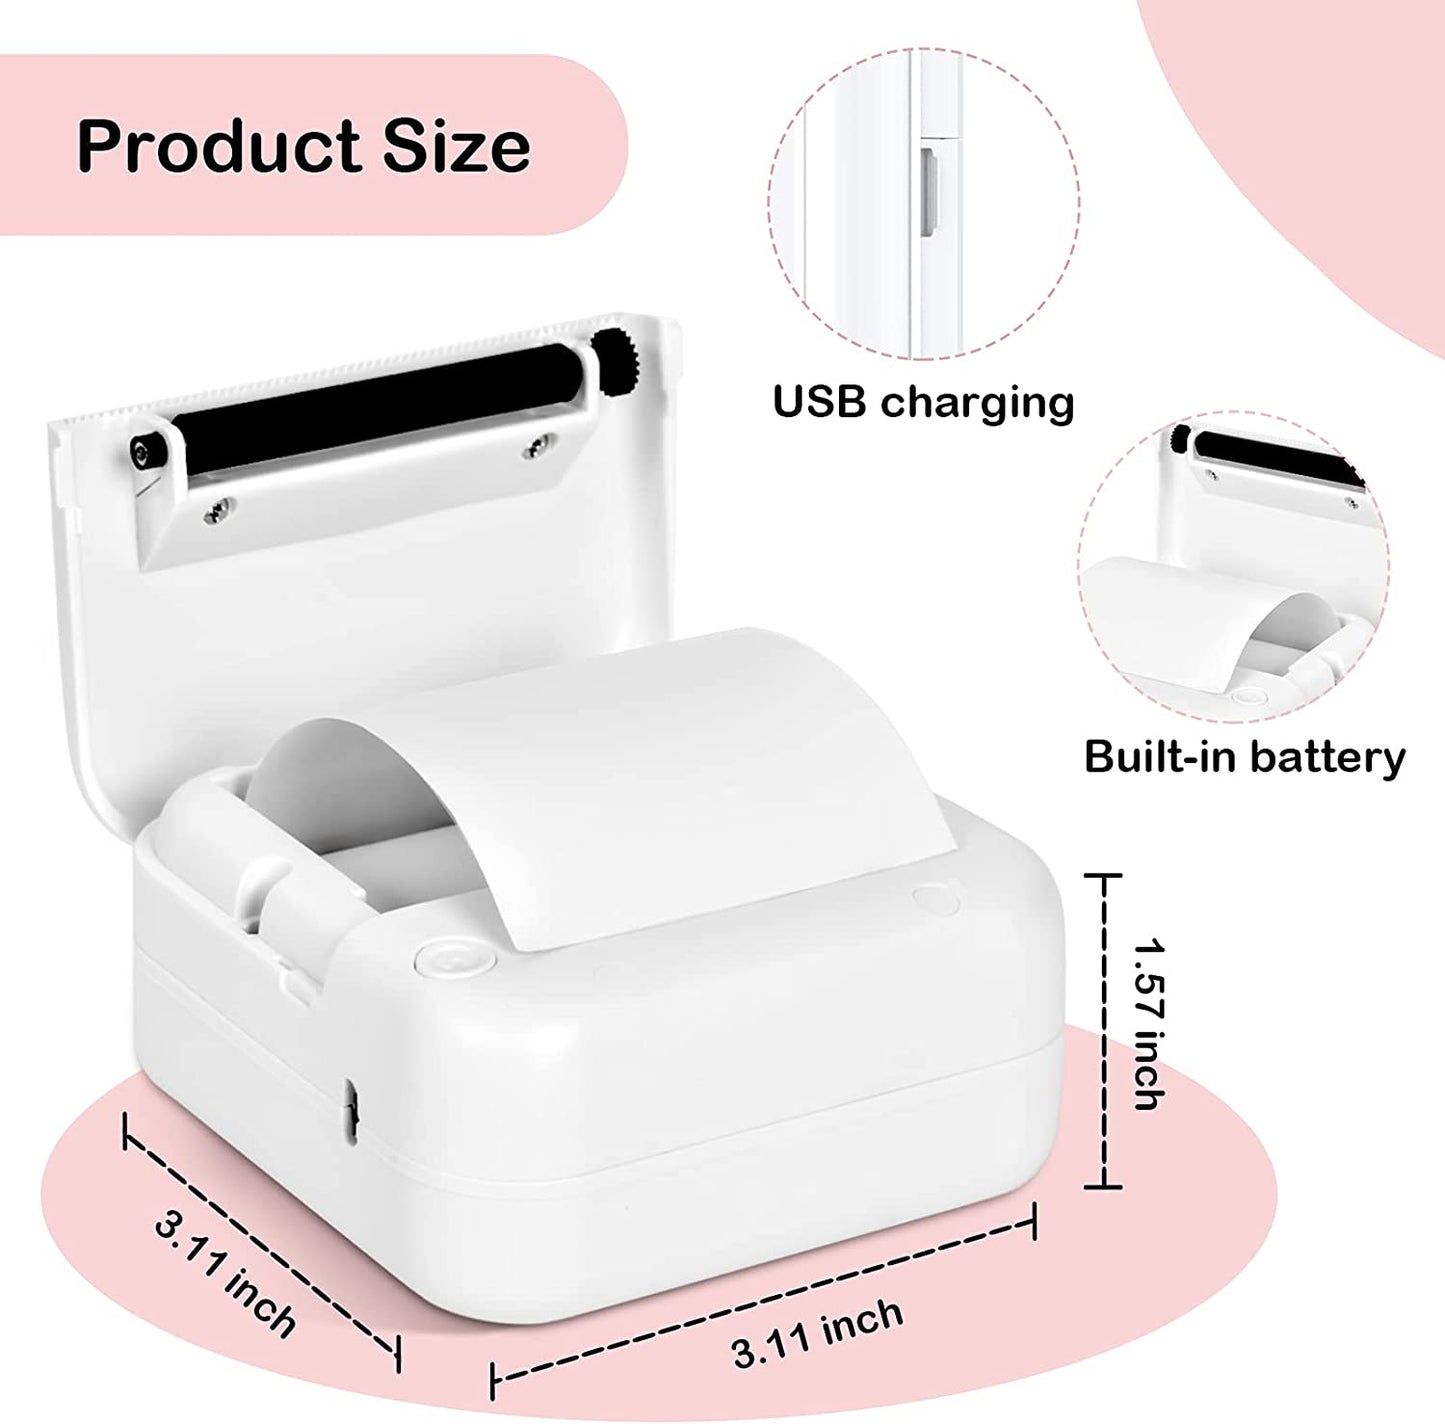 MINI M28 WIRELESS | INKLESS PRINTER WITH STICKY PAPER (No ink, No toner)